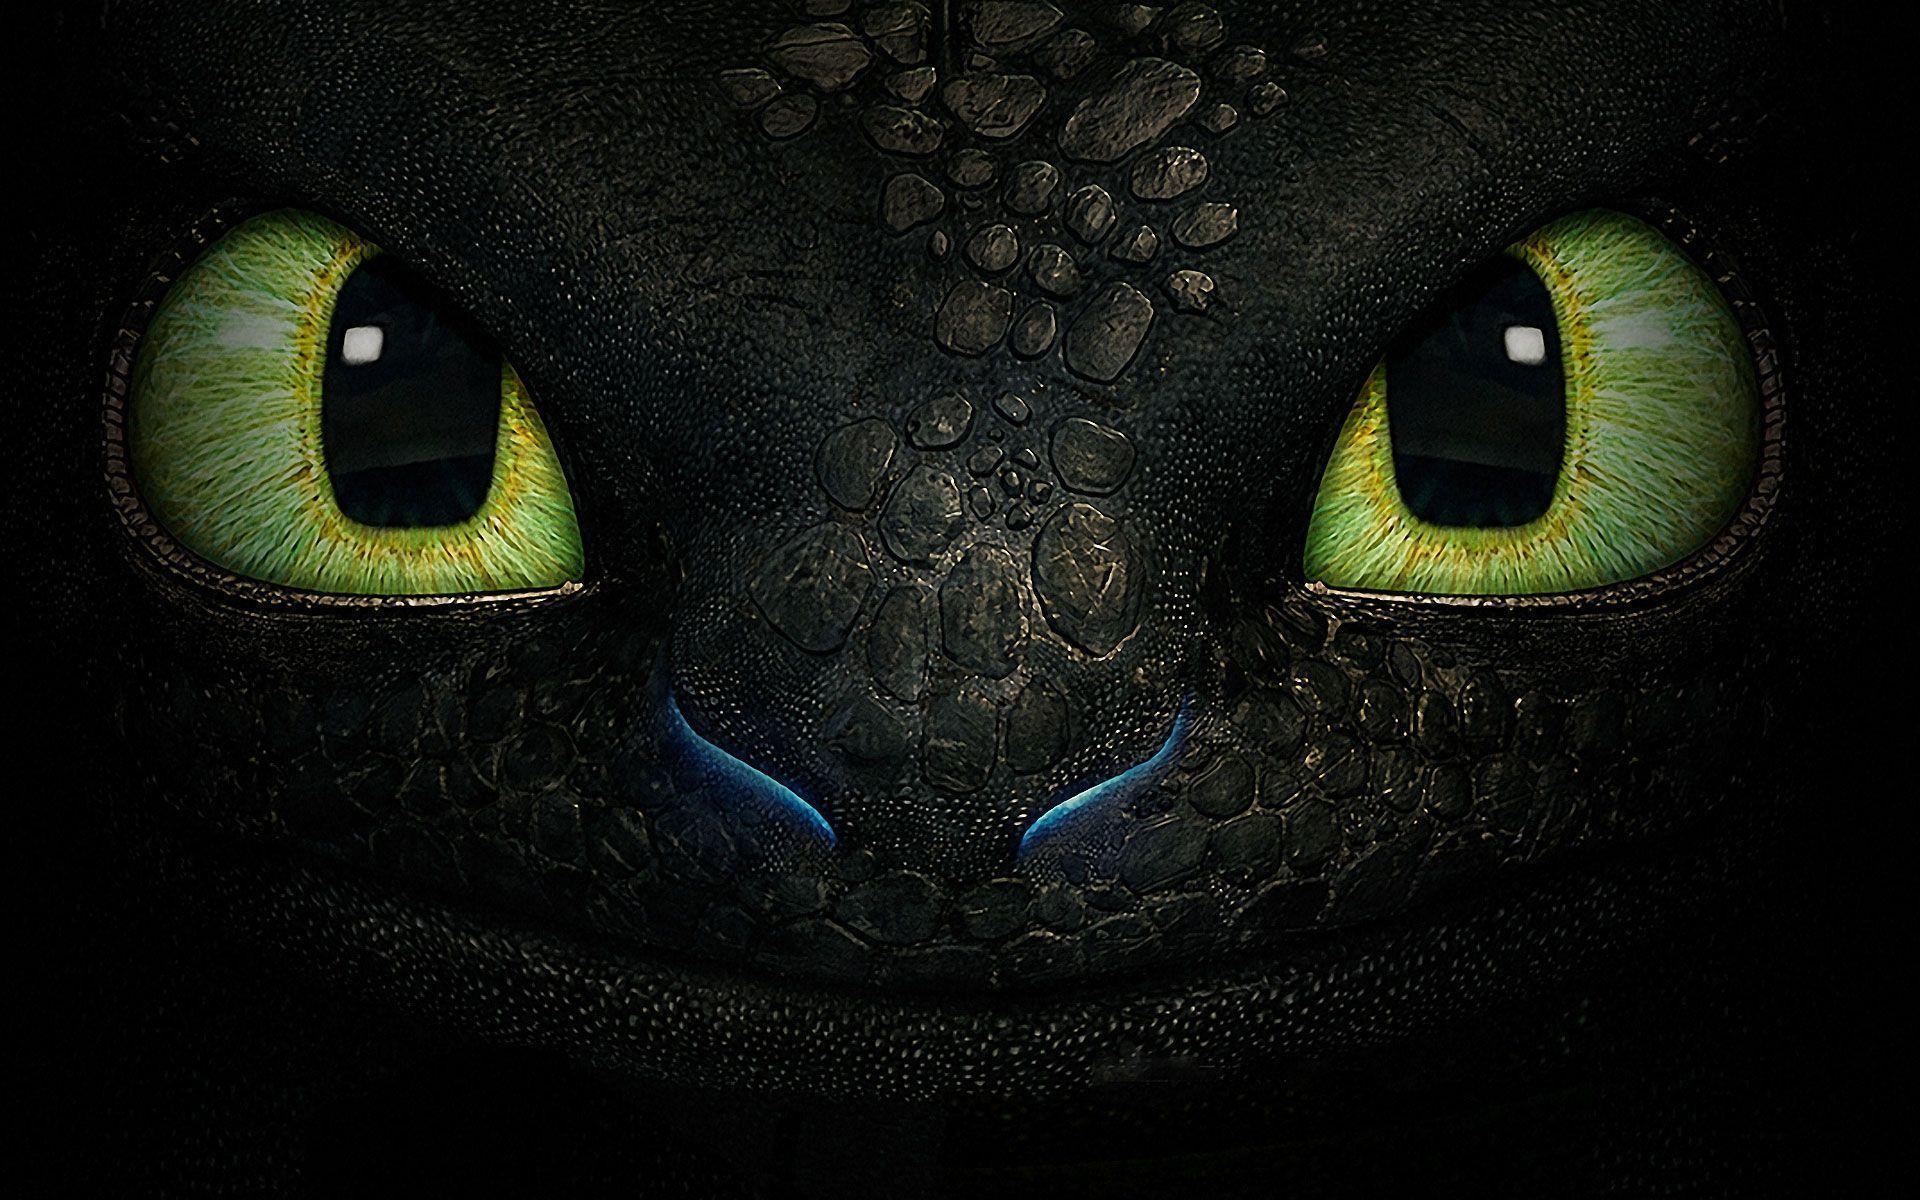 Toothless Wallpapers - Wallpaper Cave